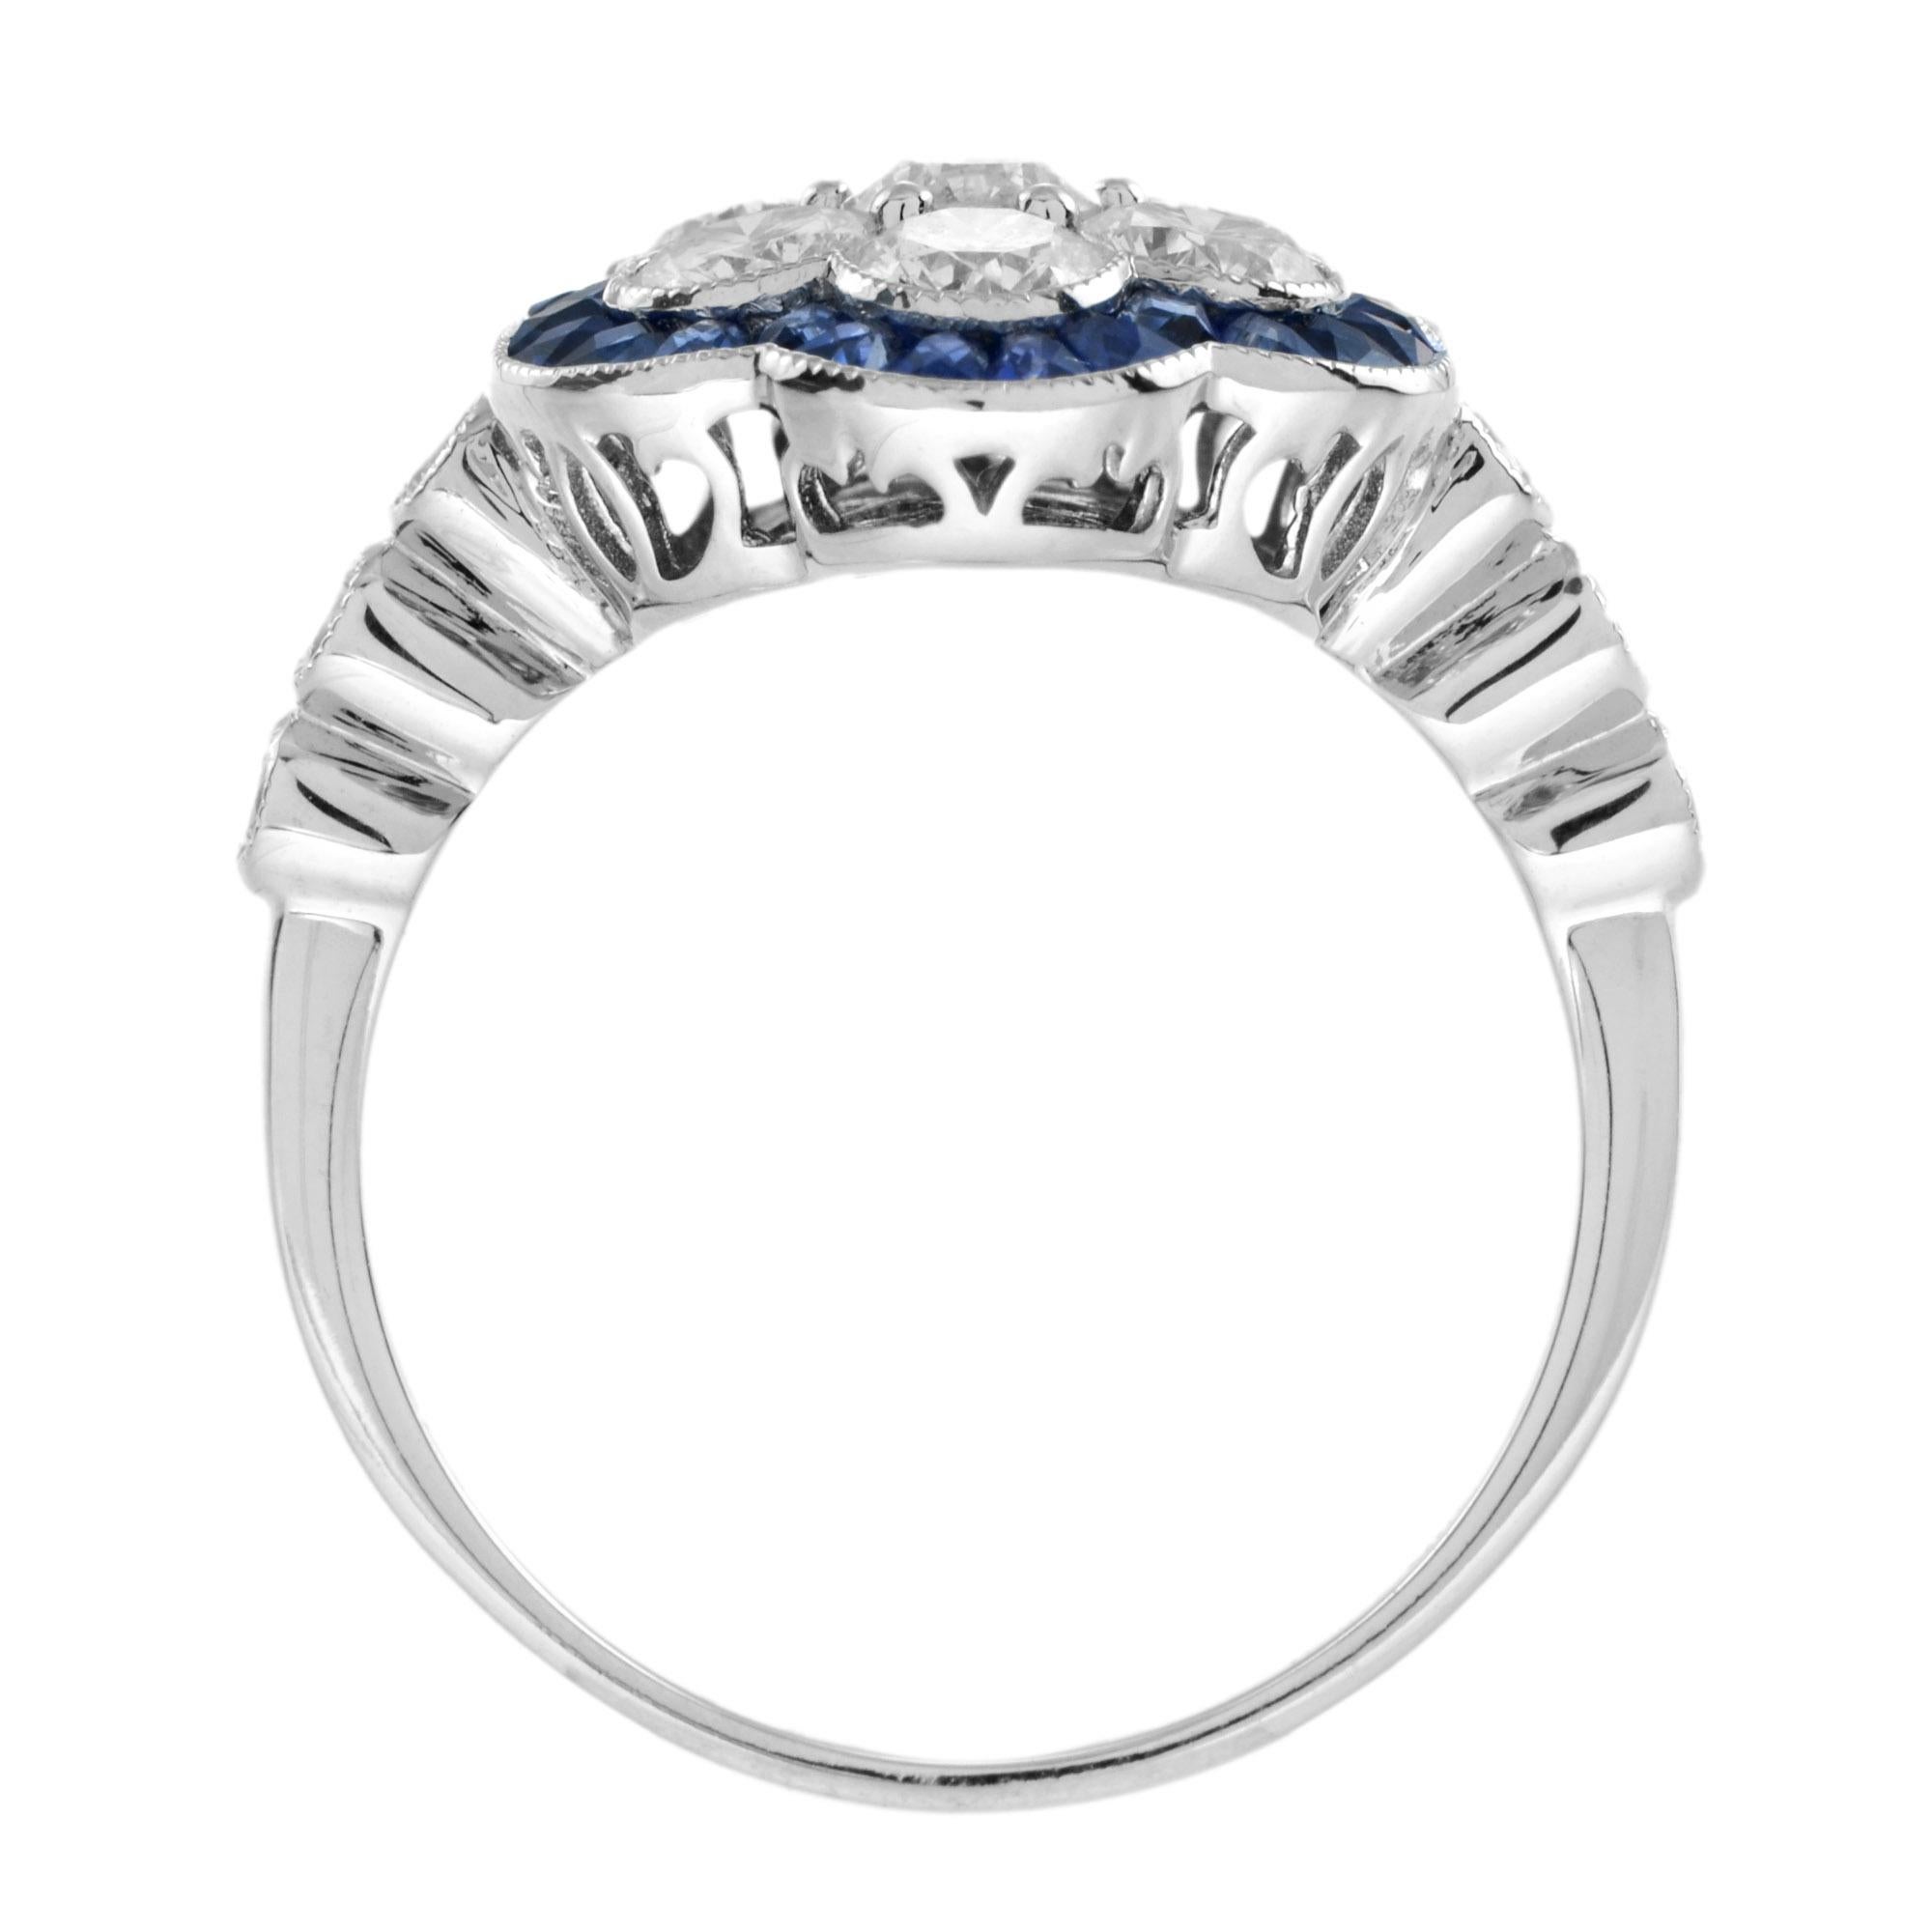 Women's Art Deco Style Diamond and Sapphire Cluster Ring in 18K White Gold